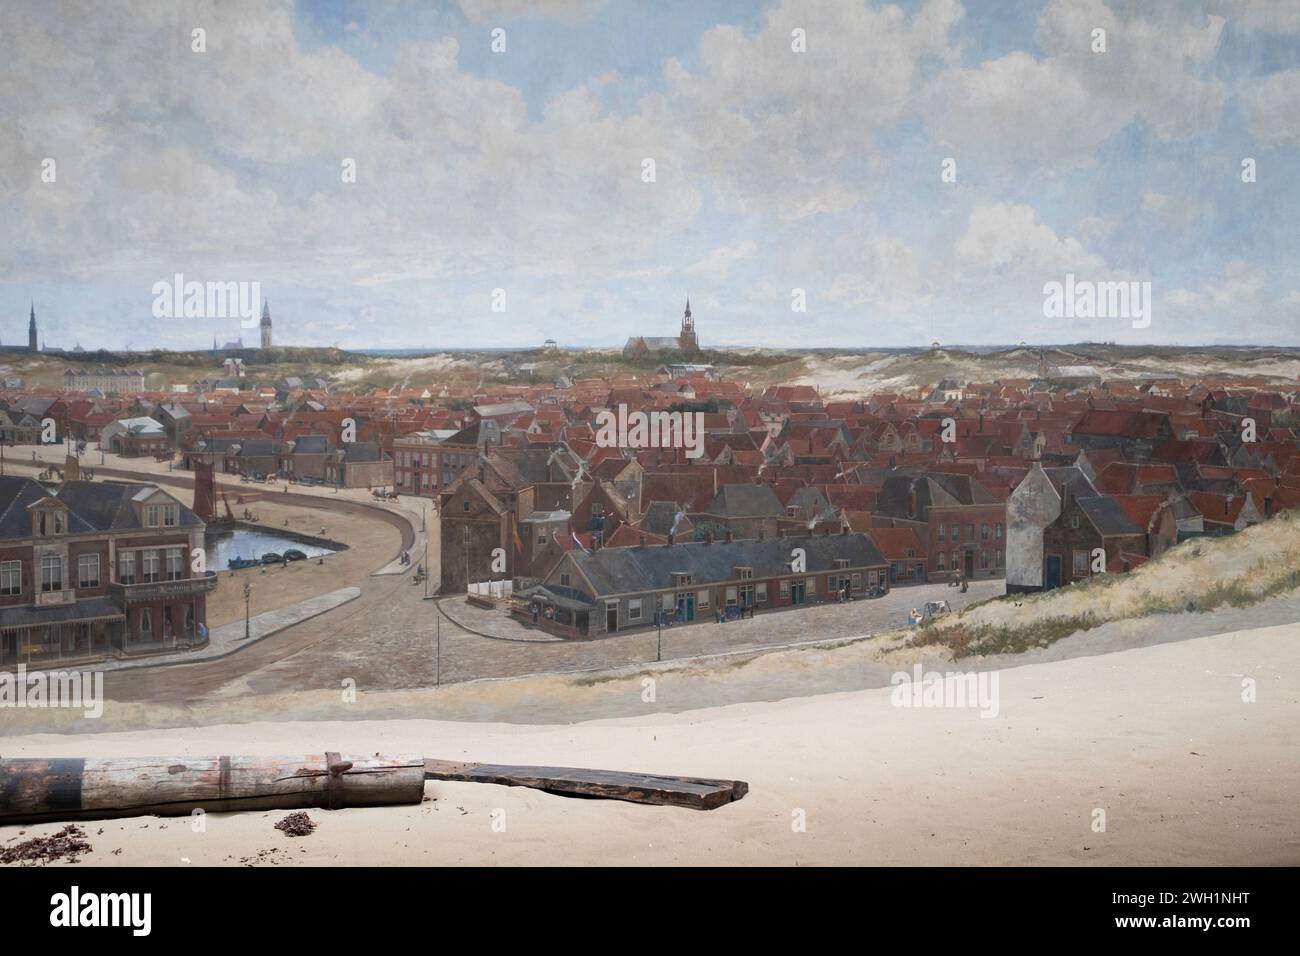 Small section of the giant cylindrical painting by the painter Mesdag, with fake terrain in the foreground in the famous Museum Mesdag in the Hague Stock Photo